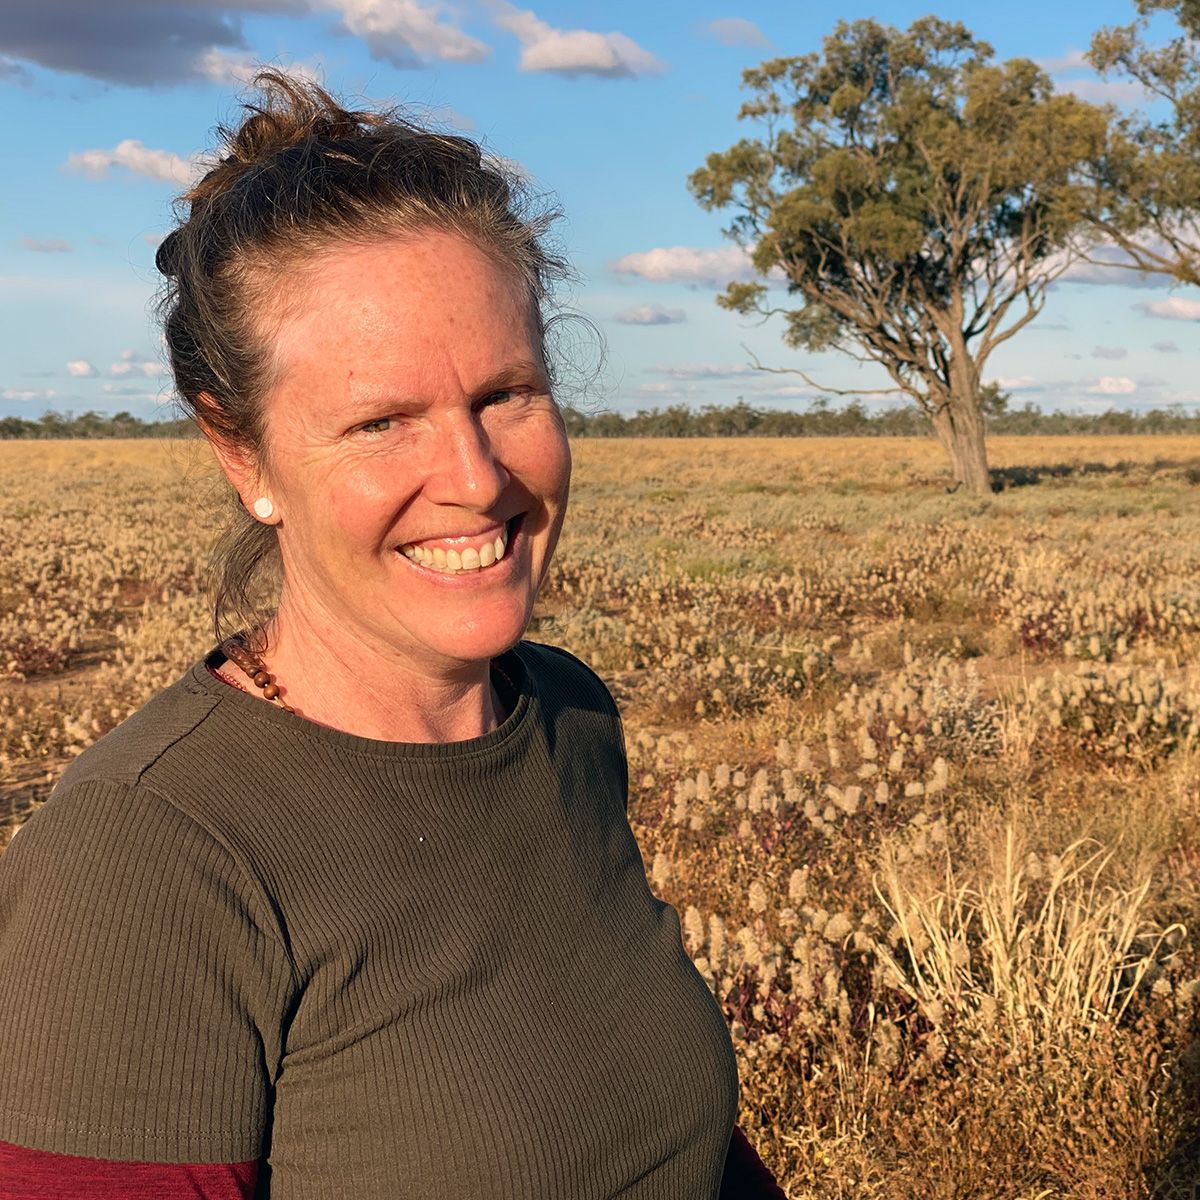 Deborah Metters smiling in front of a landscape of golden scrubby grasses with a tree in the background.